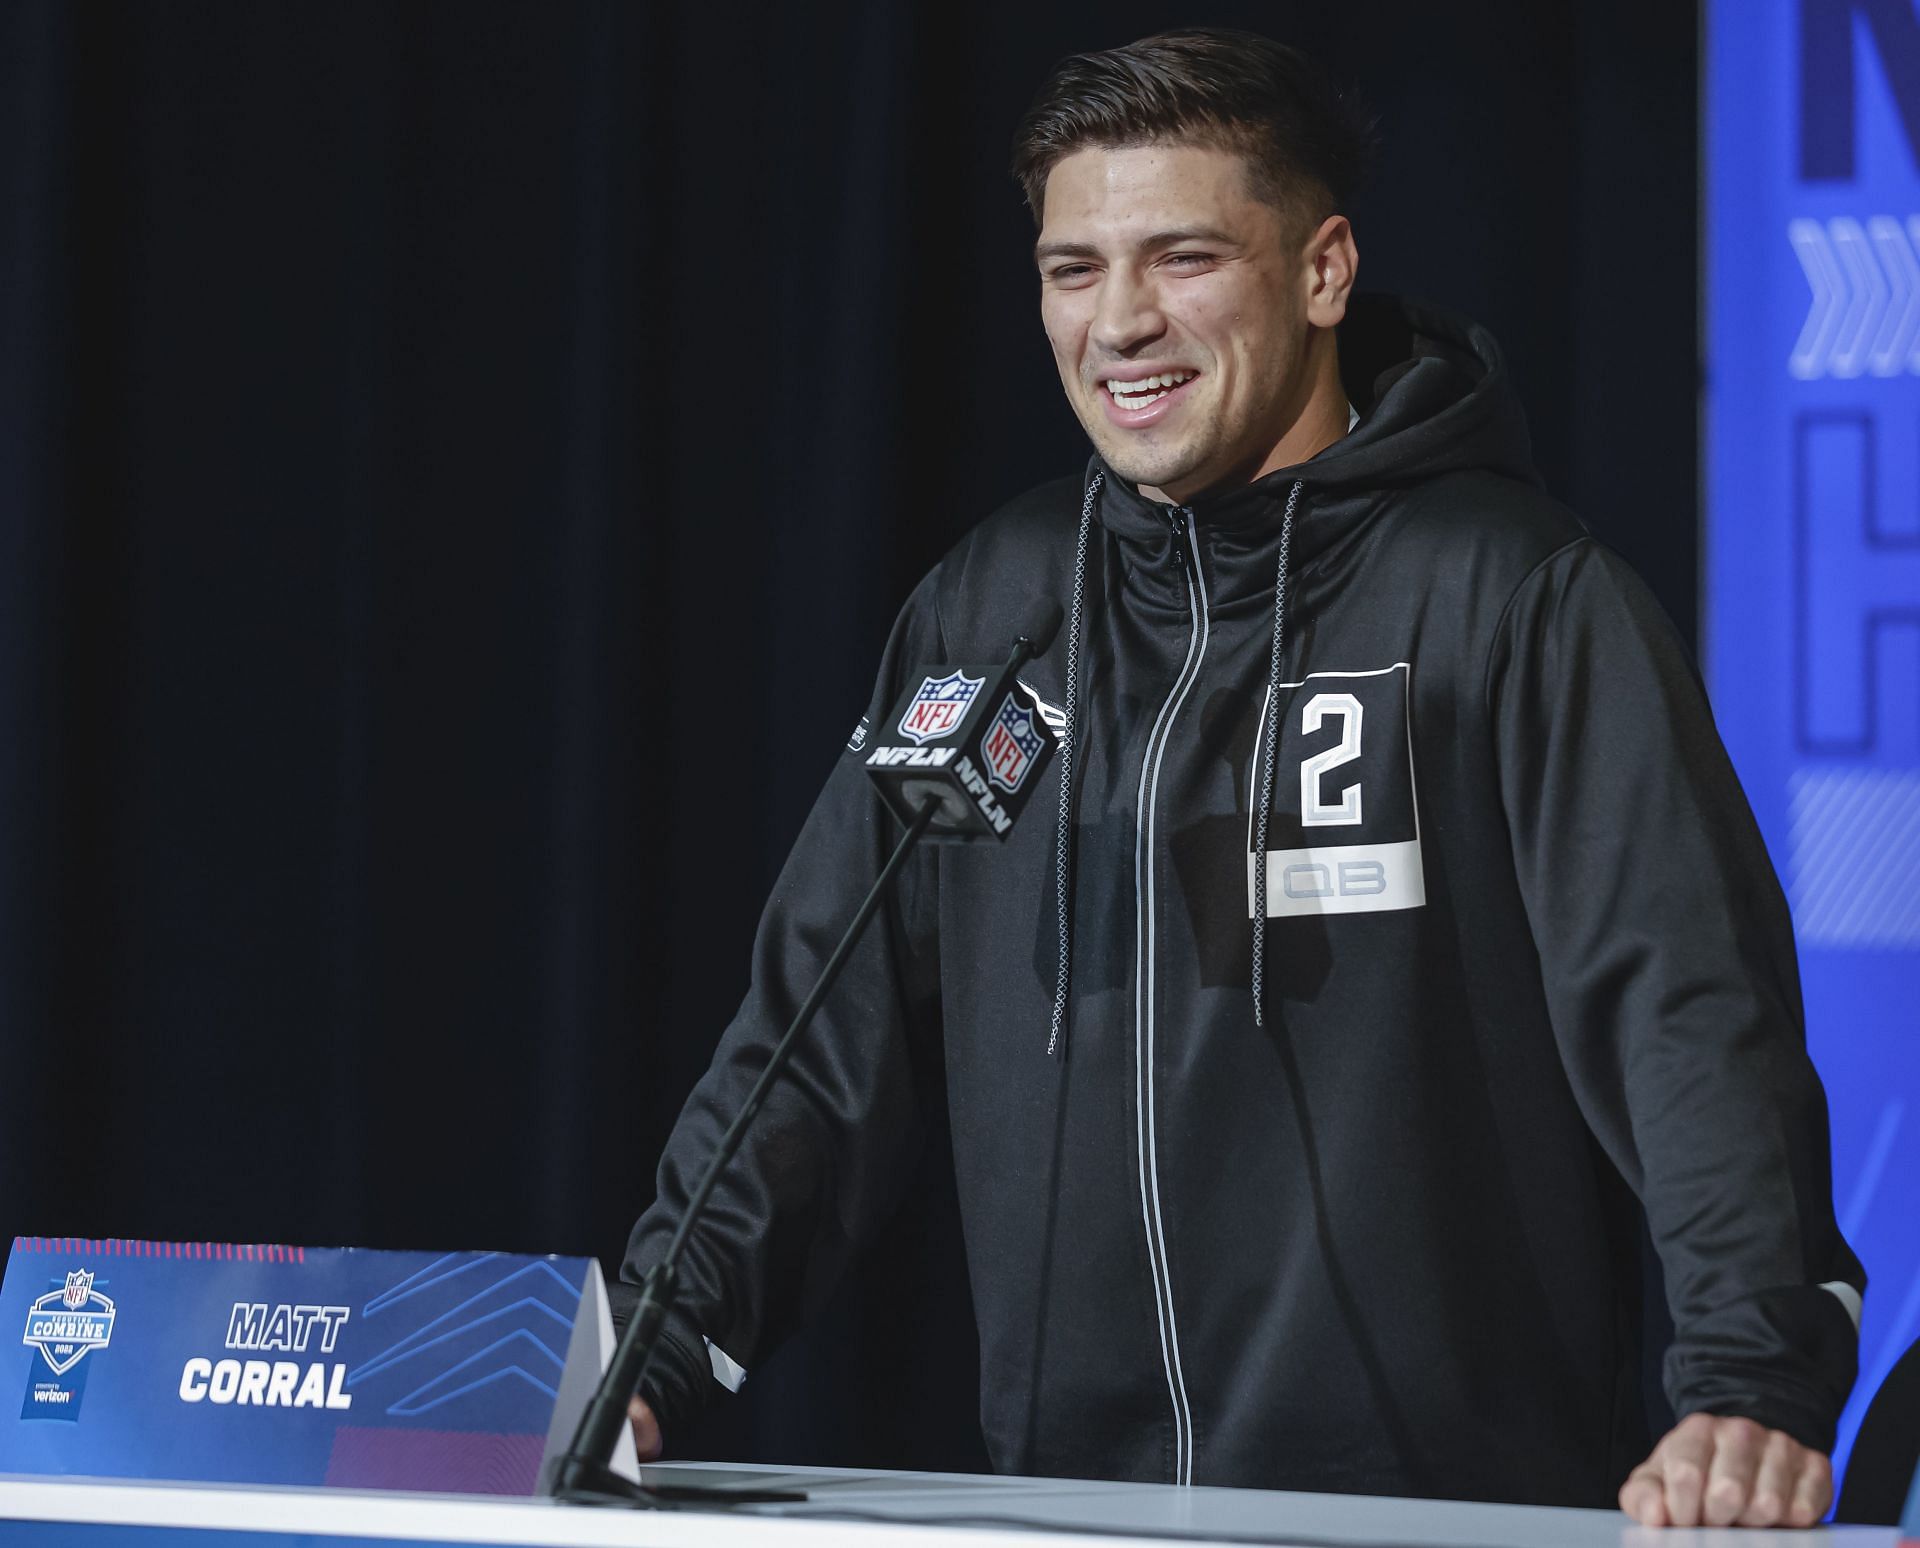 Despite a right ankle injury, 2022 NFL Draft prospect Matt Corral may still be preferable to Baker Mayfield.